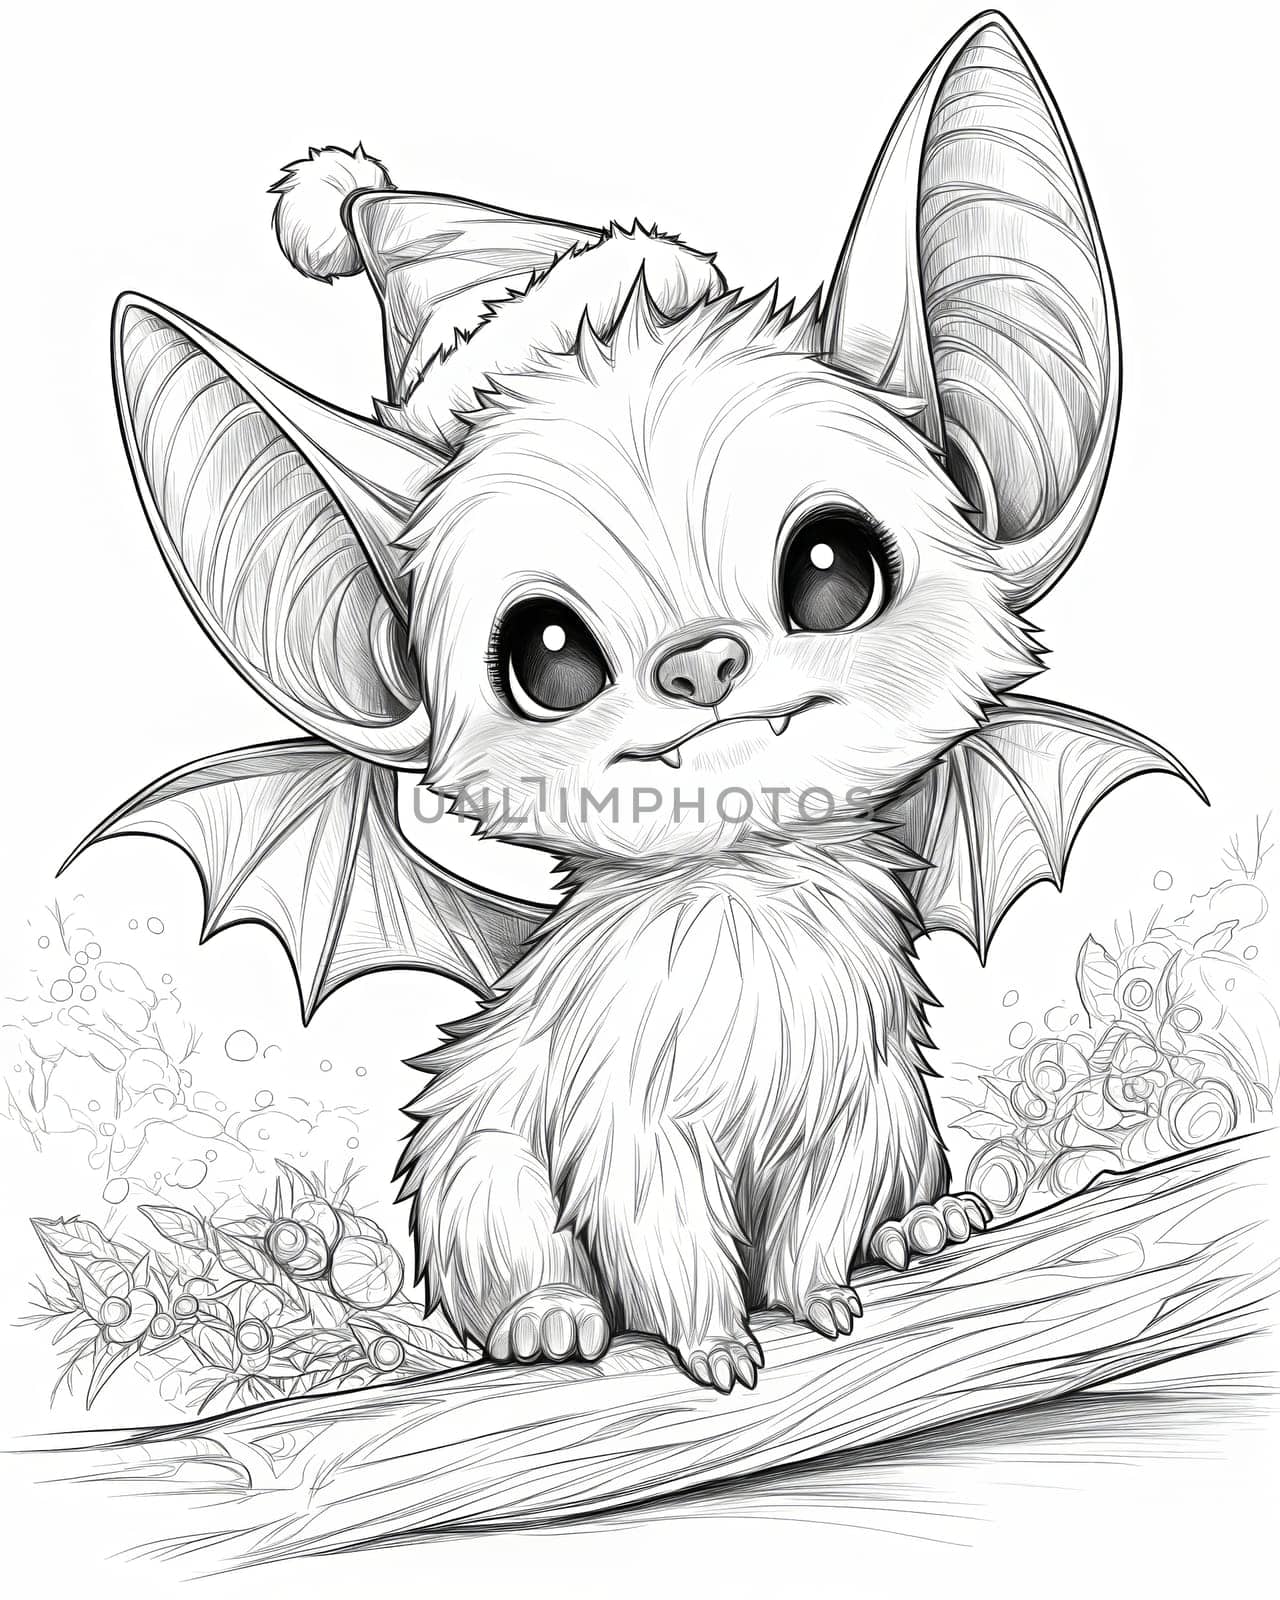 Coloring book for children, coloring animal, bat. by Fischeron